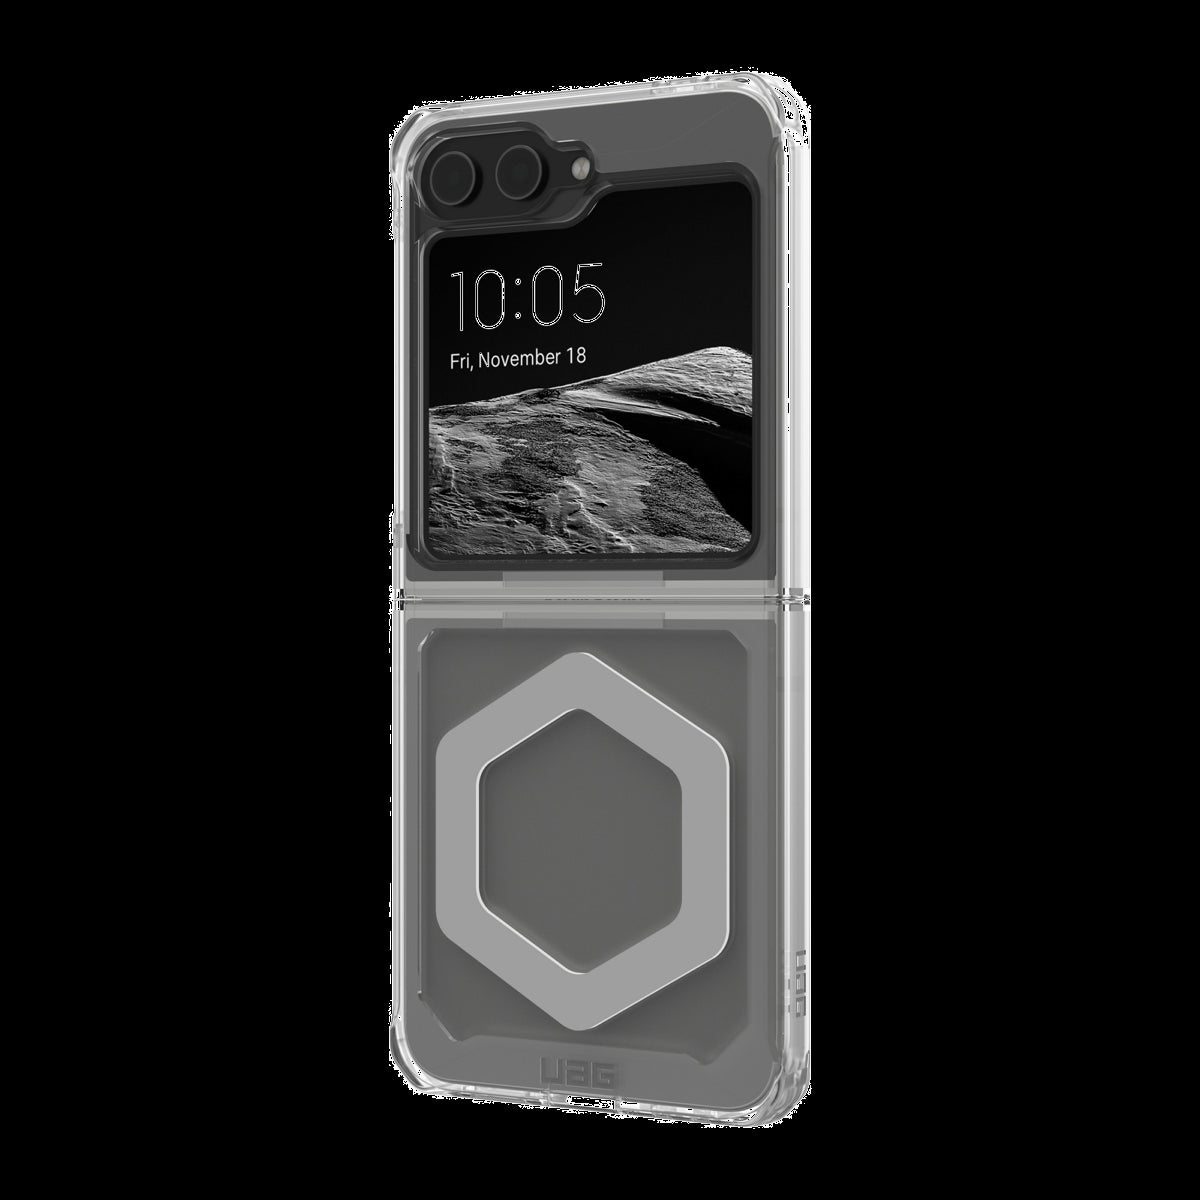 <p>The UAG Plyo Pro case with MagSafe offers military-tested drop protection in a sleek, modern design to create everyday armour and security.</p>